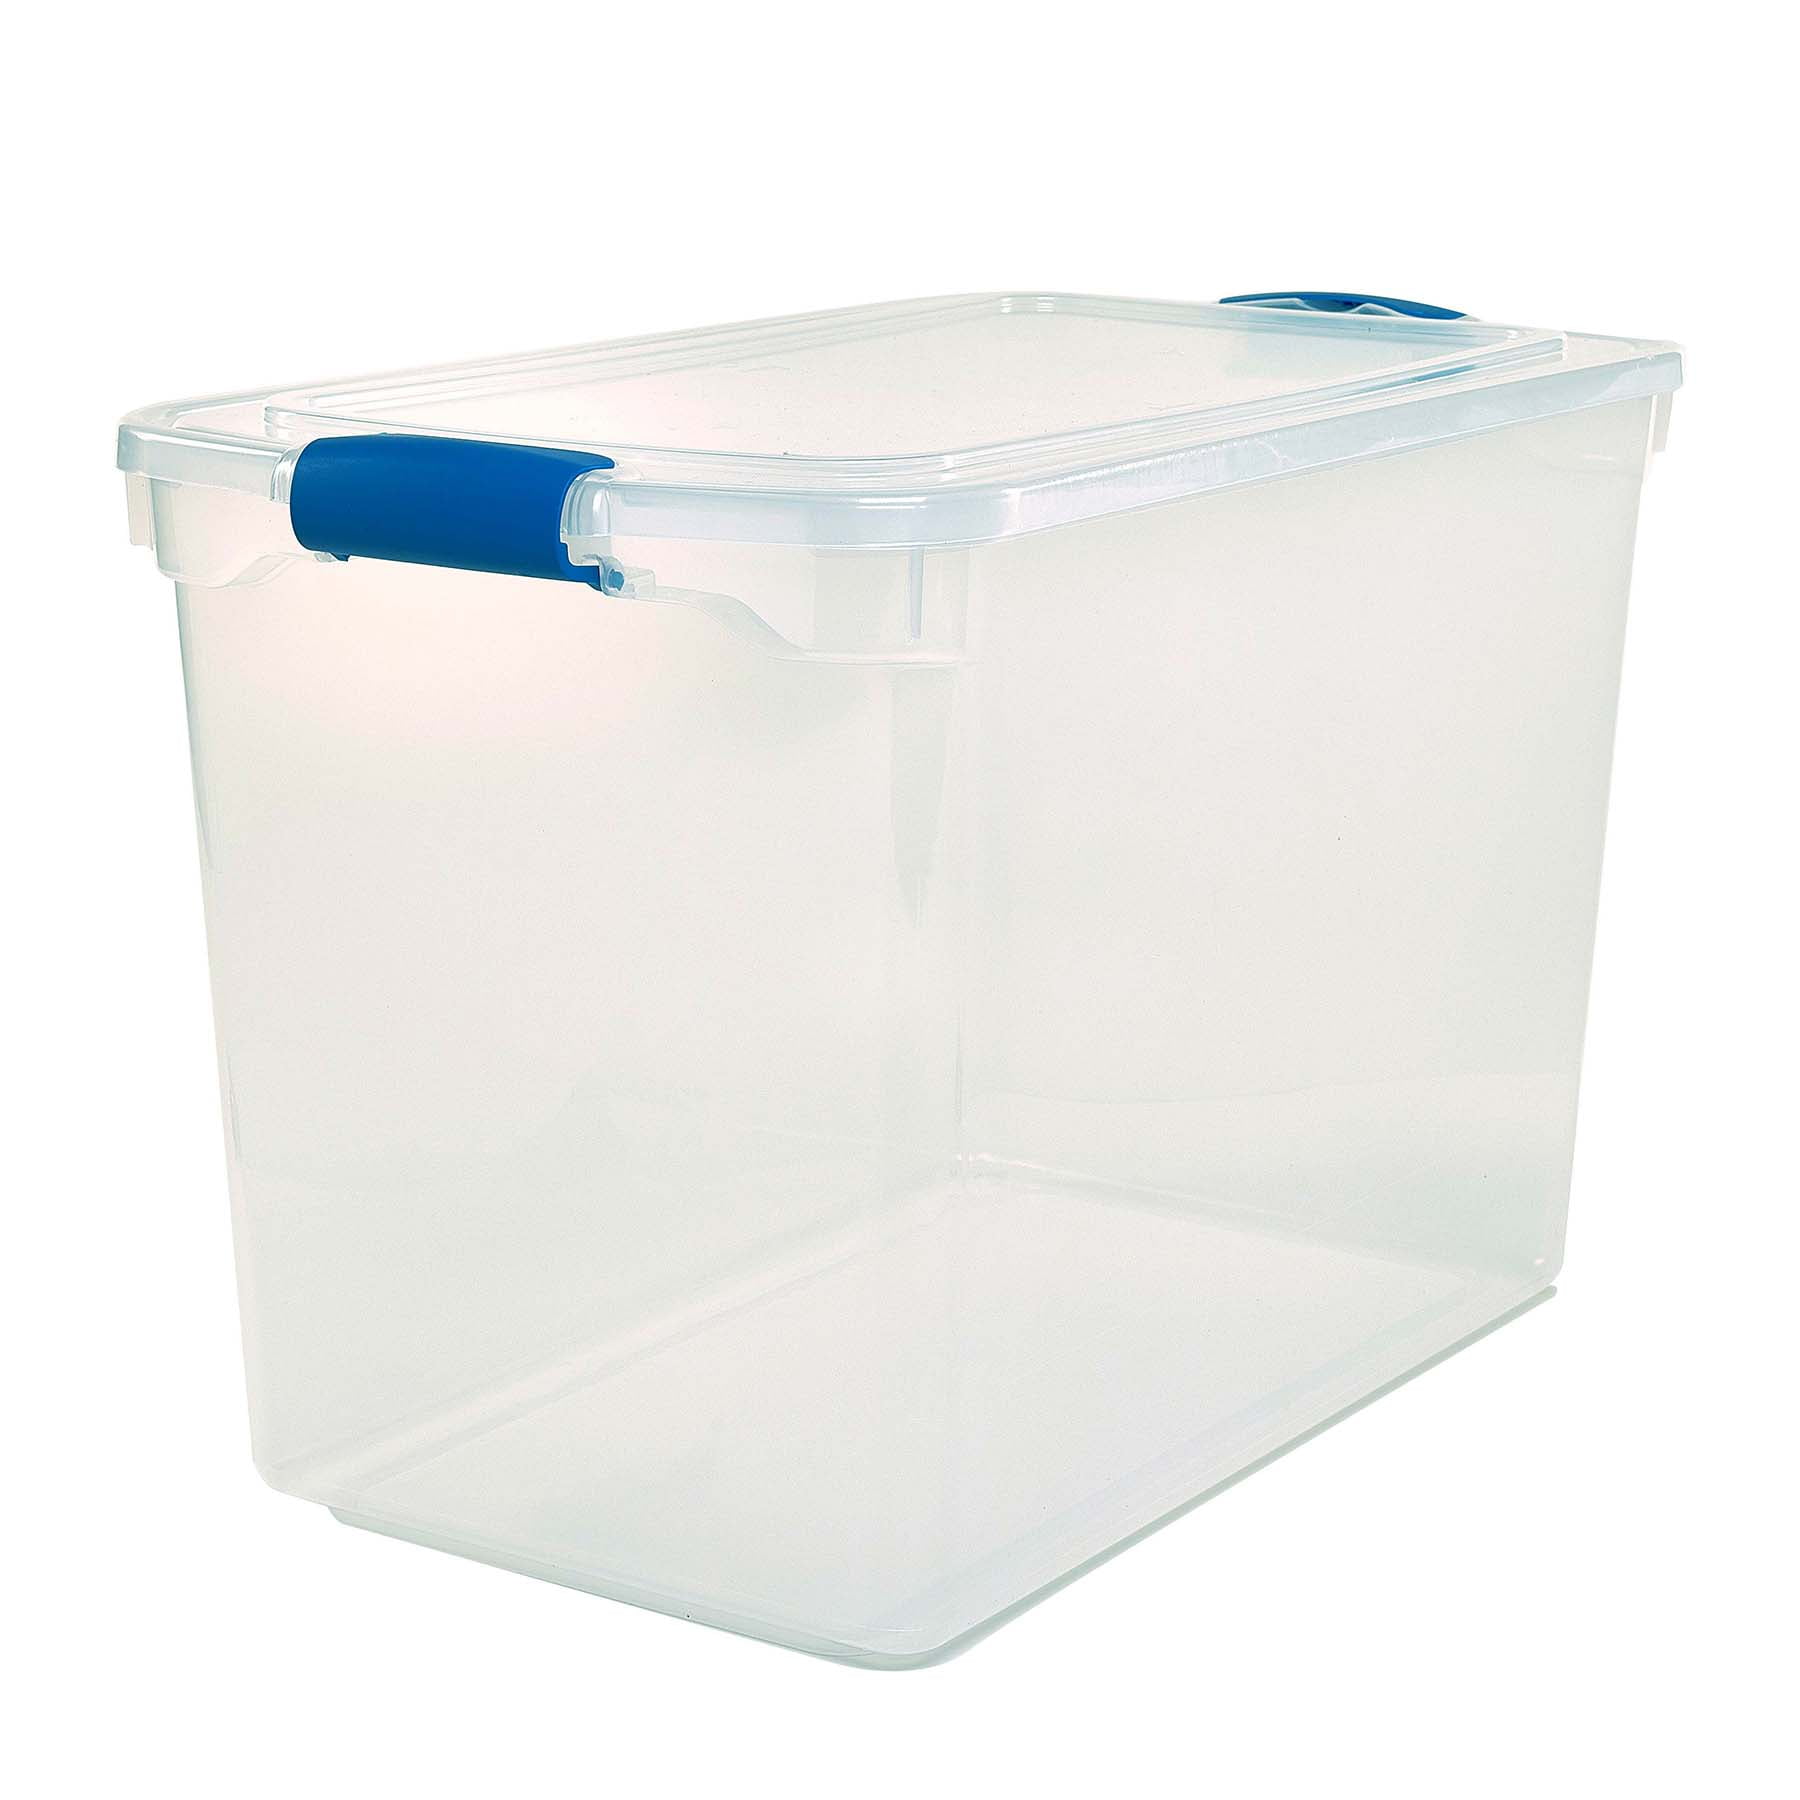 Homz 112 Quart Plastic Storage Latching Container, Clear/Blue, Set of 2 - 1